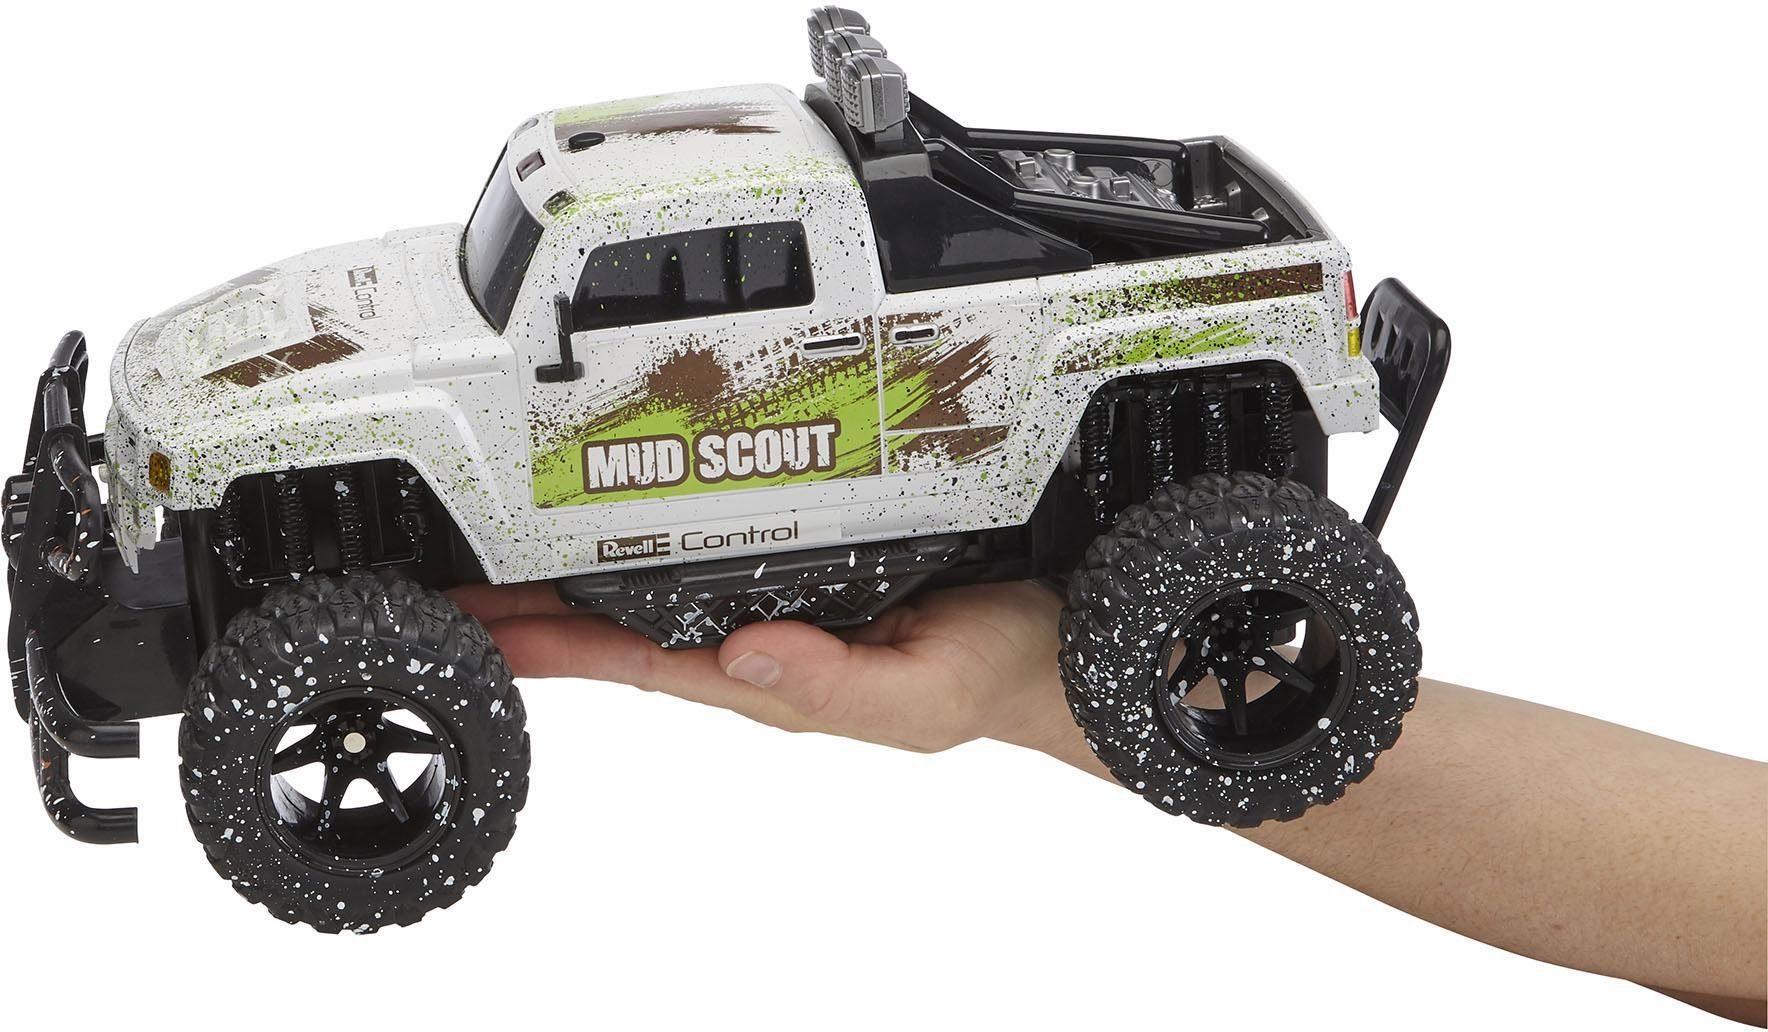 Revell® control, Monster Revell® Truck Scout Mud RC-Truck